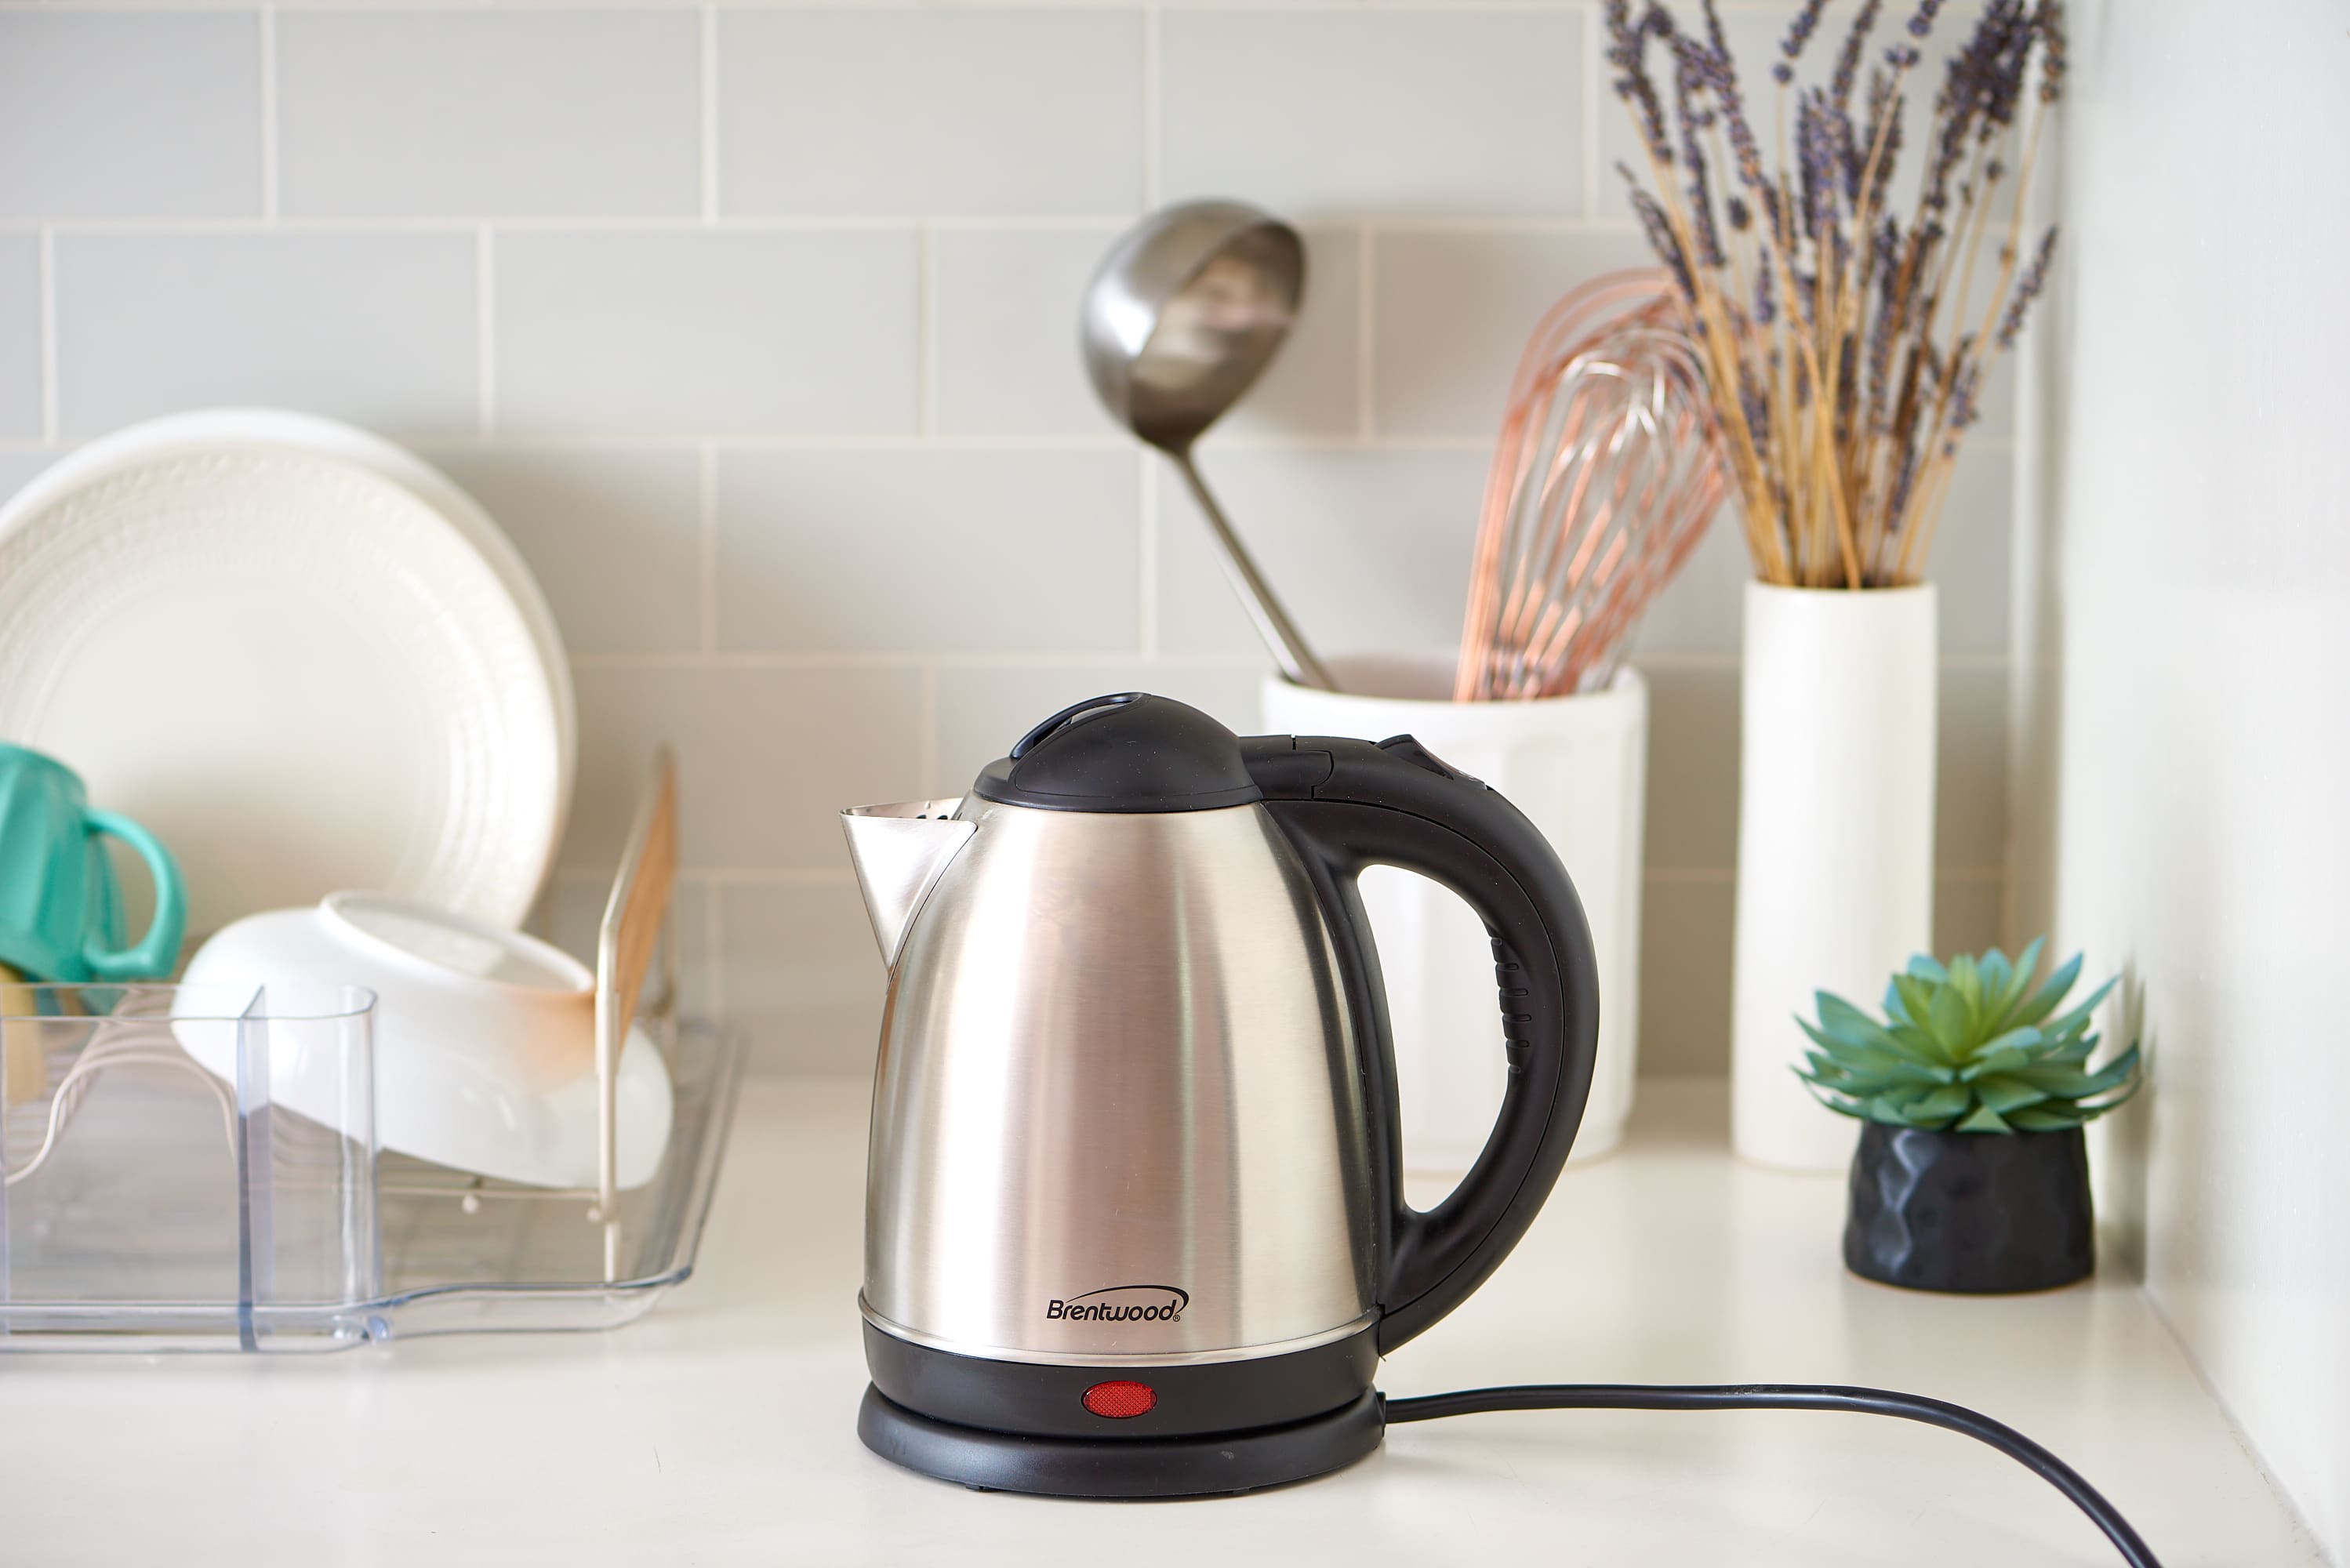 How to descale a kettle using natural products